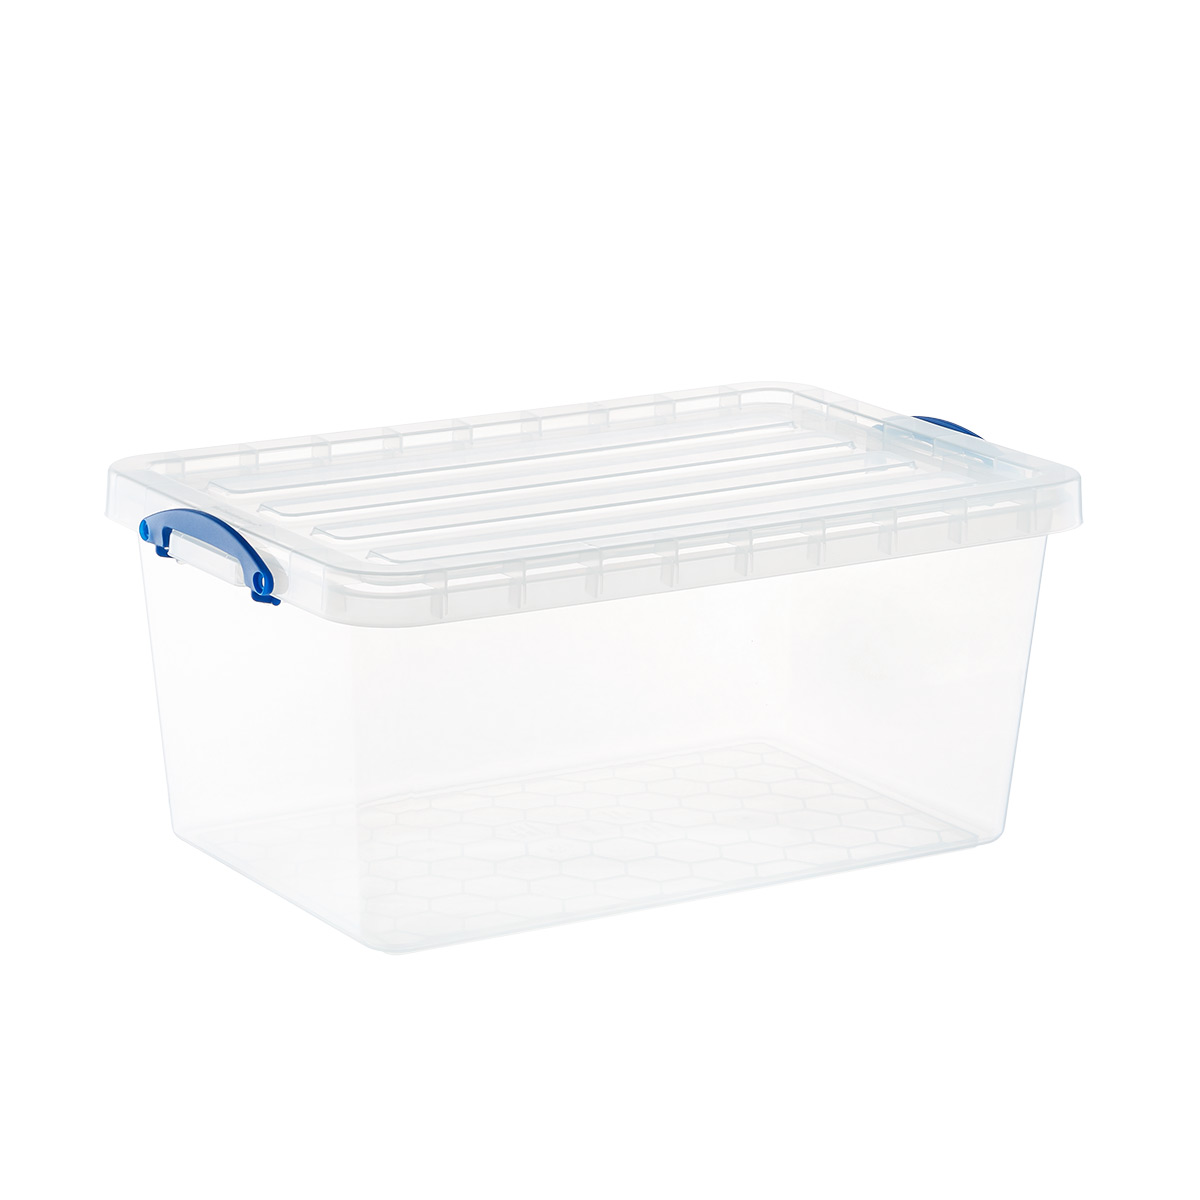 https://www.containerstore.com/catalogimages/400548/10081546-premier-stacking-tote-61L.jpg